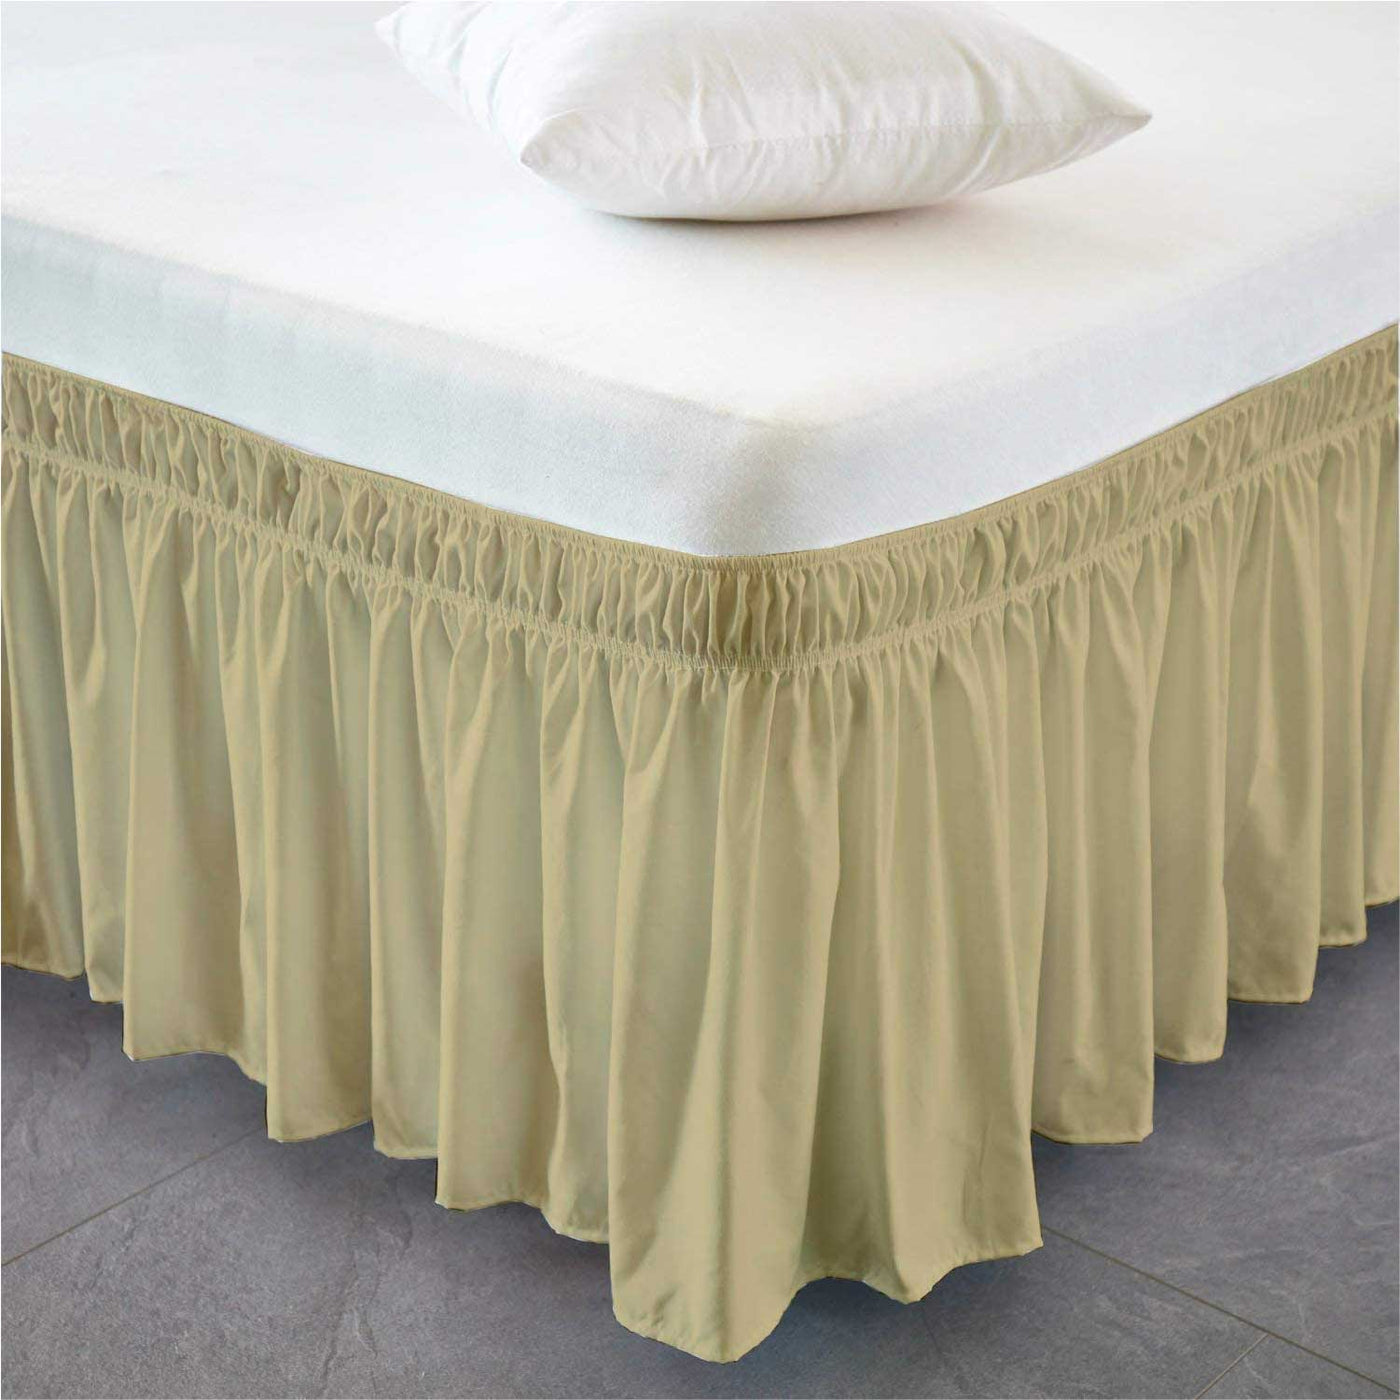 Wrap Around Dust Ruffle Bed Skirt 600 Thread Count 100% Egyptian Cotton